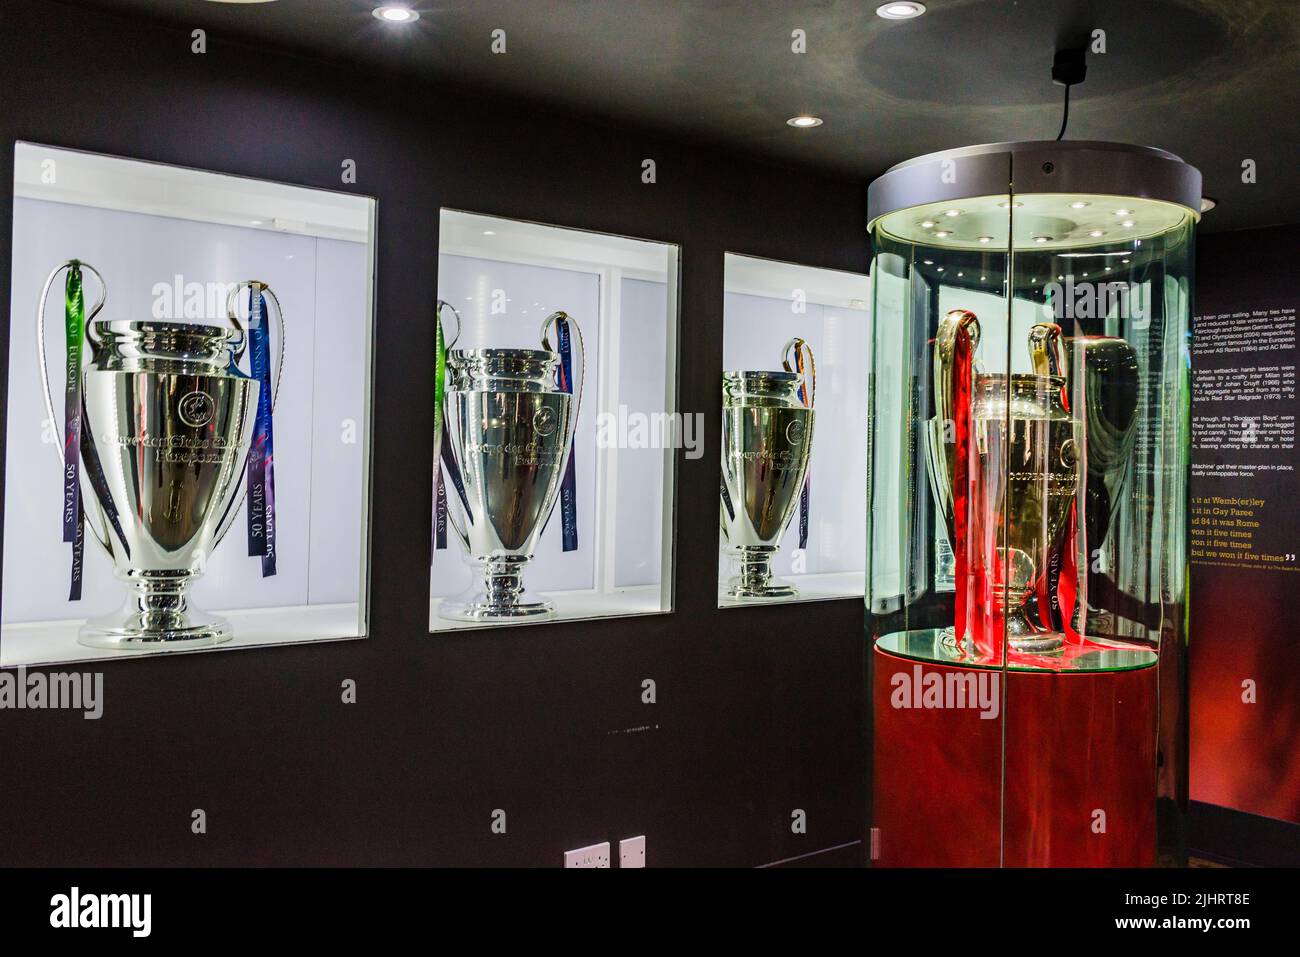 The Liverpool FC Stadium Tour, Trophy hall. Anfield is a football stadium in Anfield, Liverpool, Merseyside, England, which has a seating capacity of Stock Photo